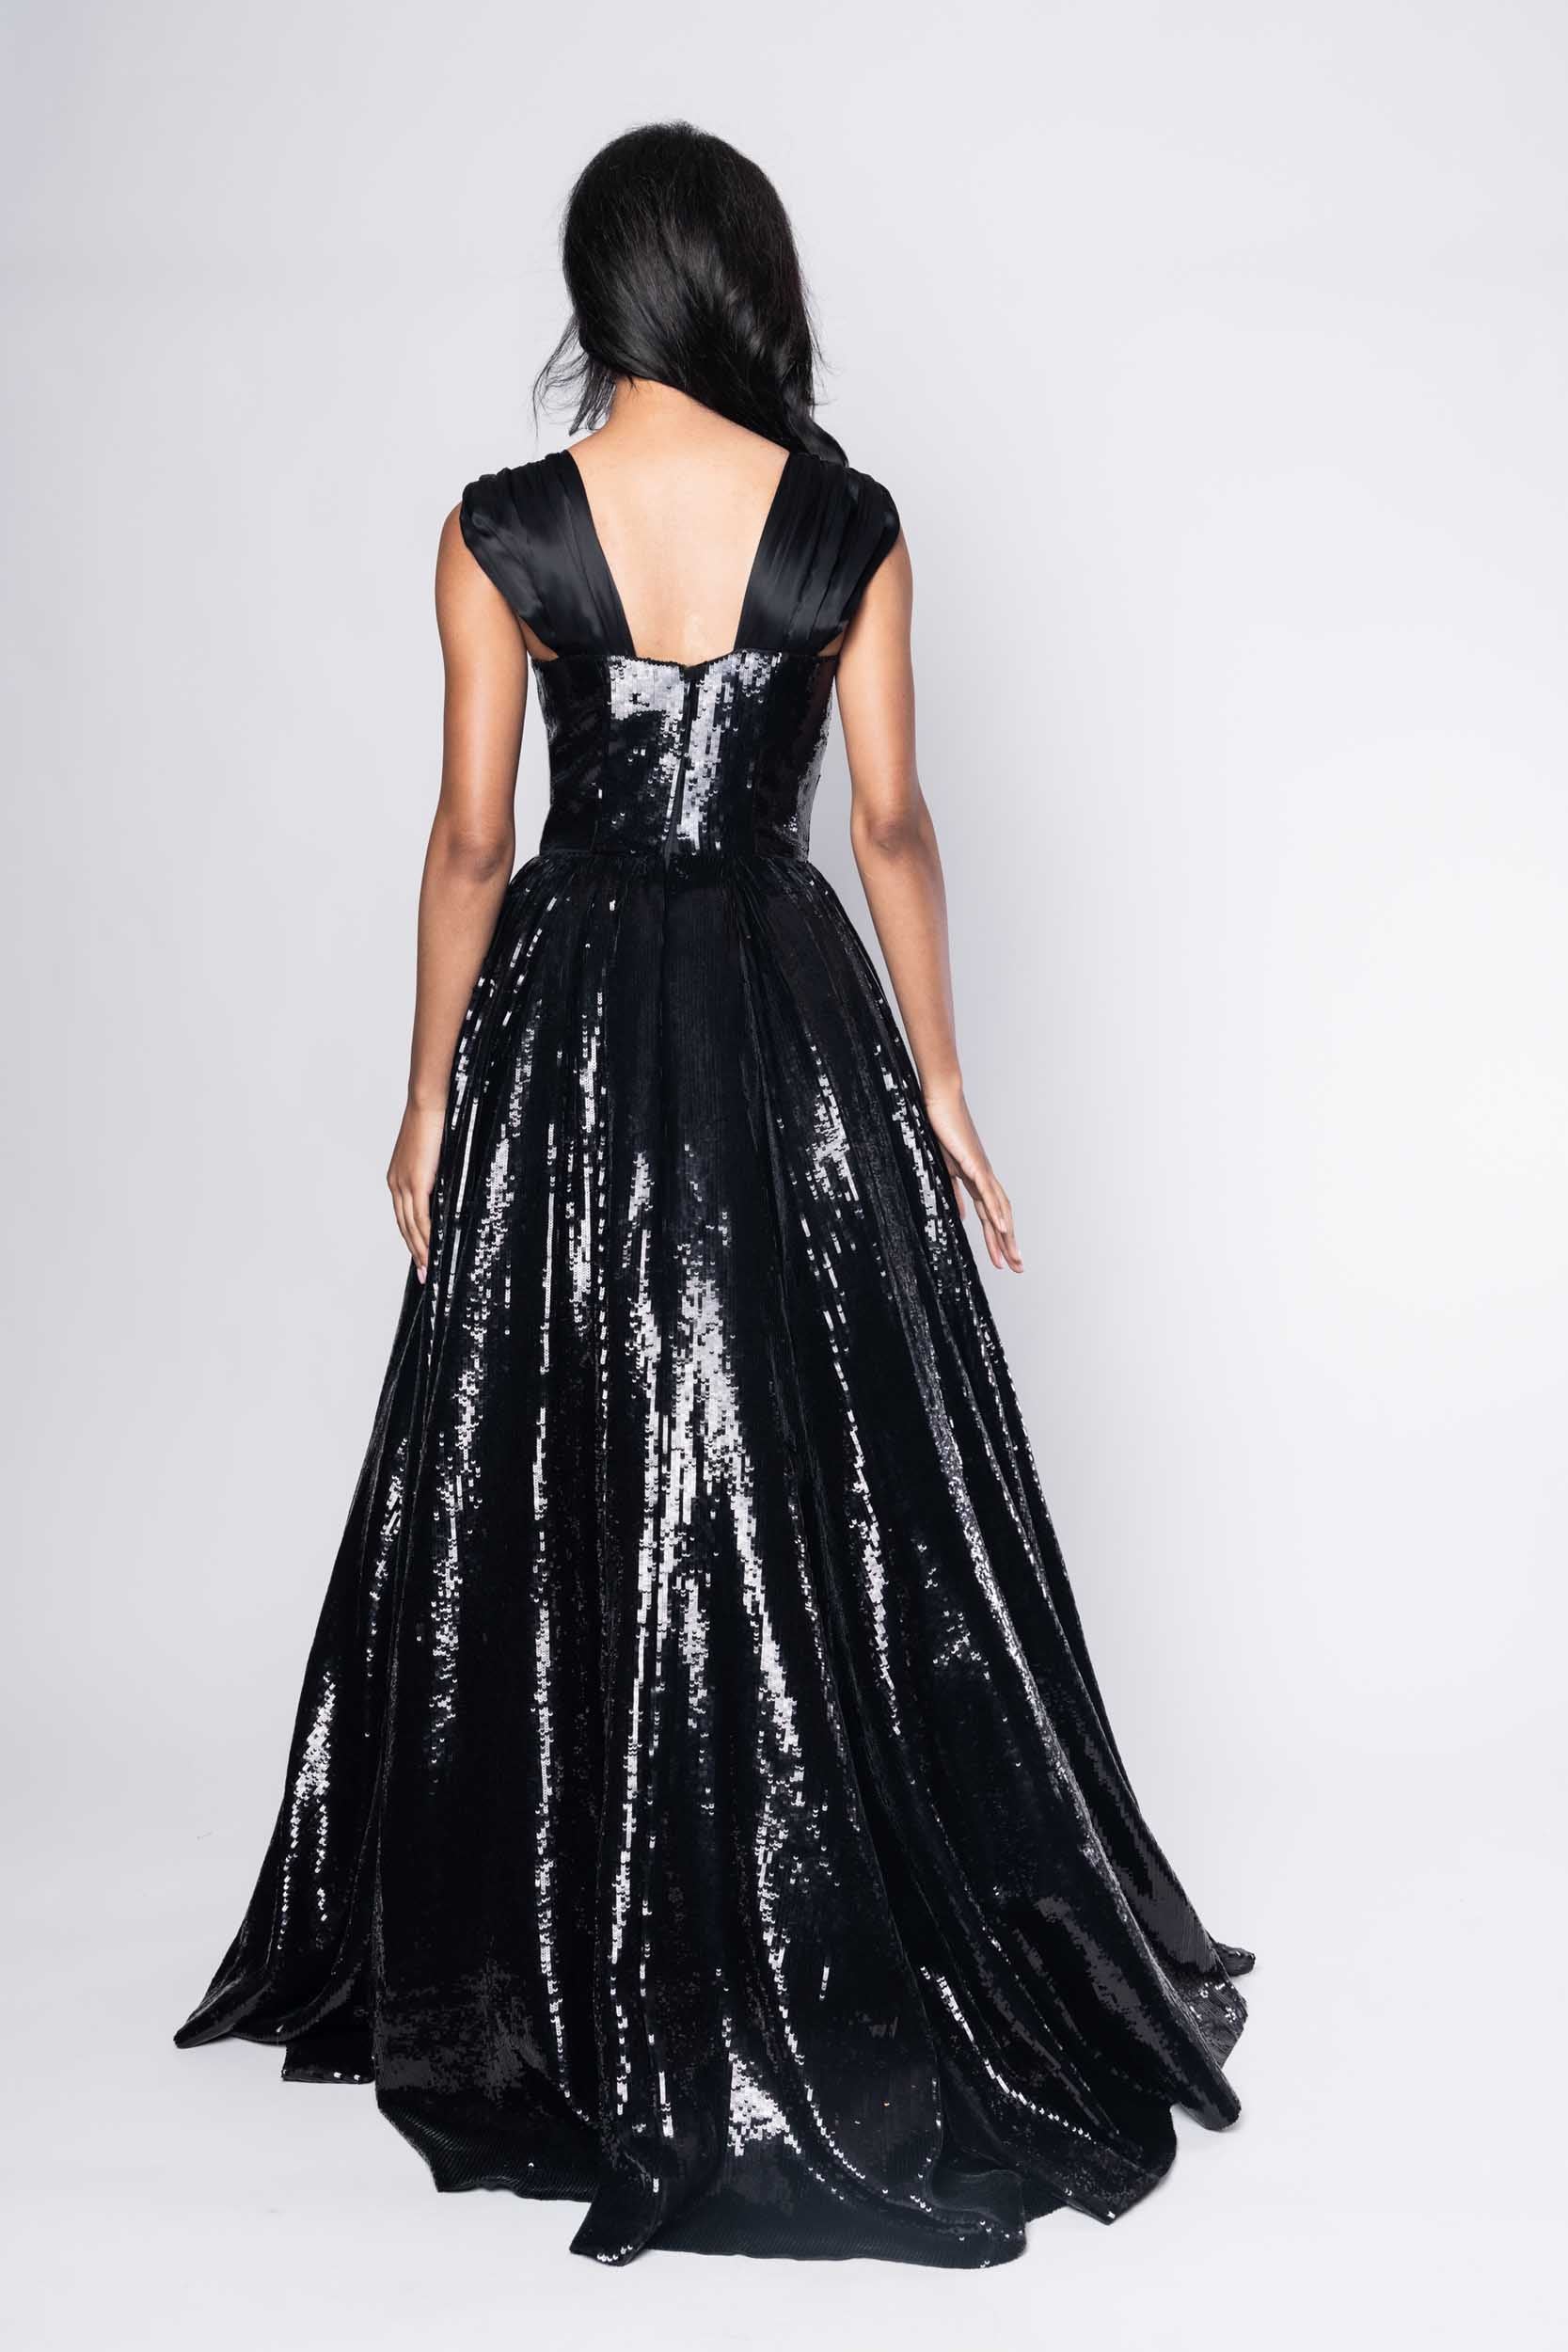 Beautiful model in an sequined, floor-length Sujata Gazder ball gown - back view